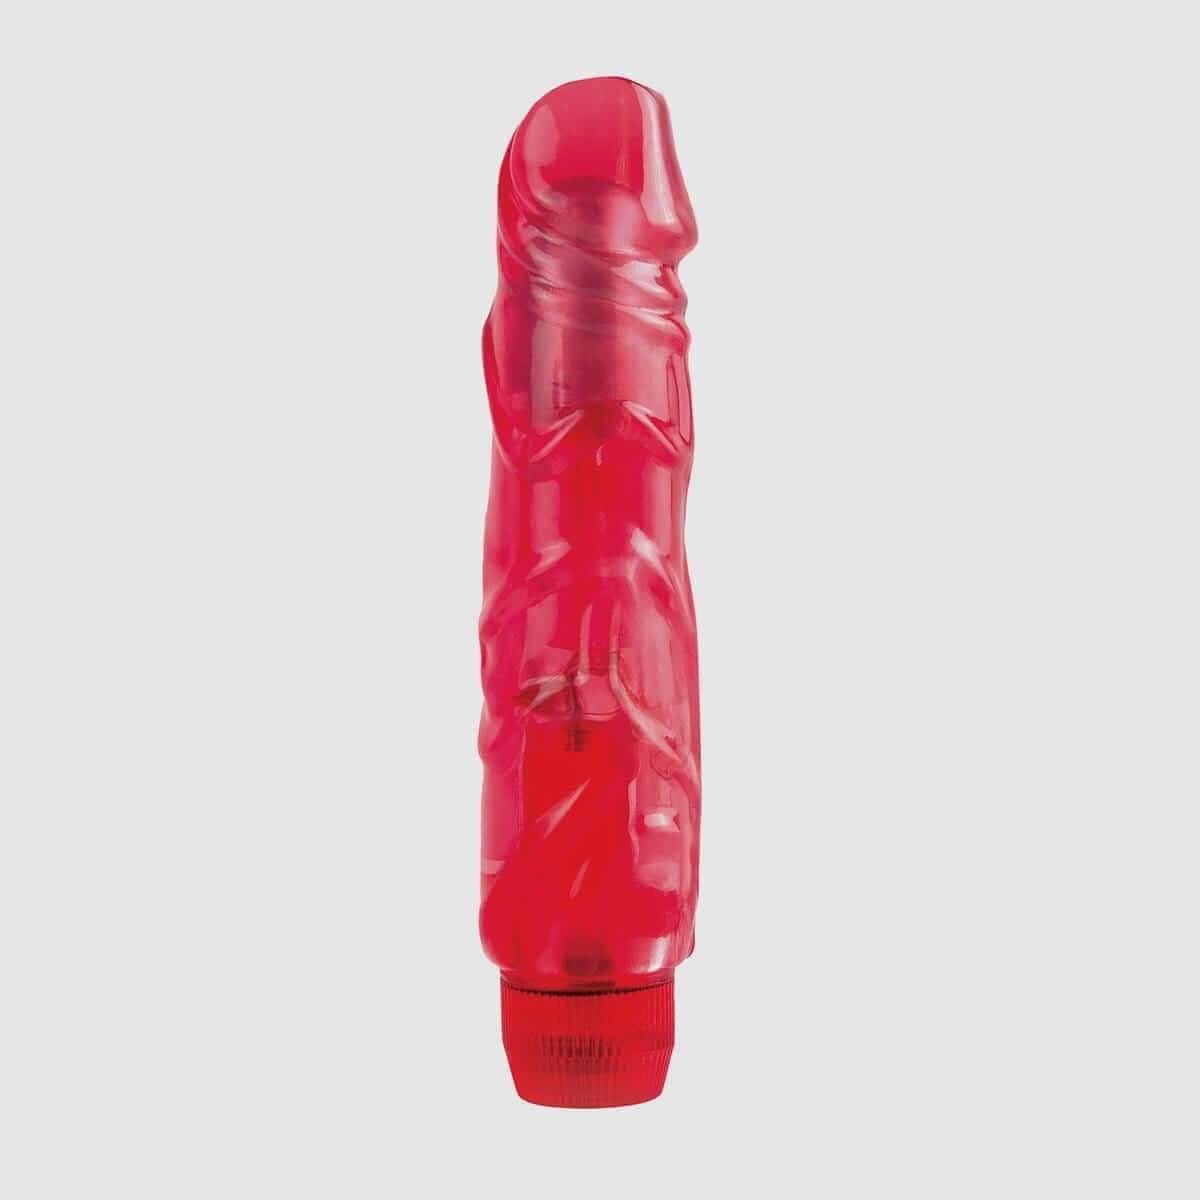 Juicy Jewels Ruby Dream Vibe - Red - Thorn & Feather Sex Toy Canada